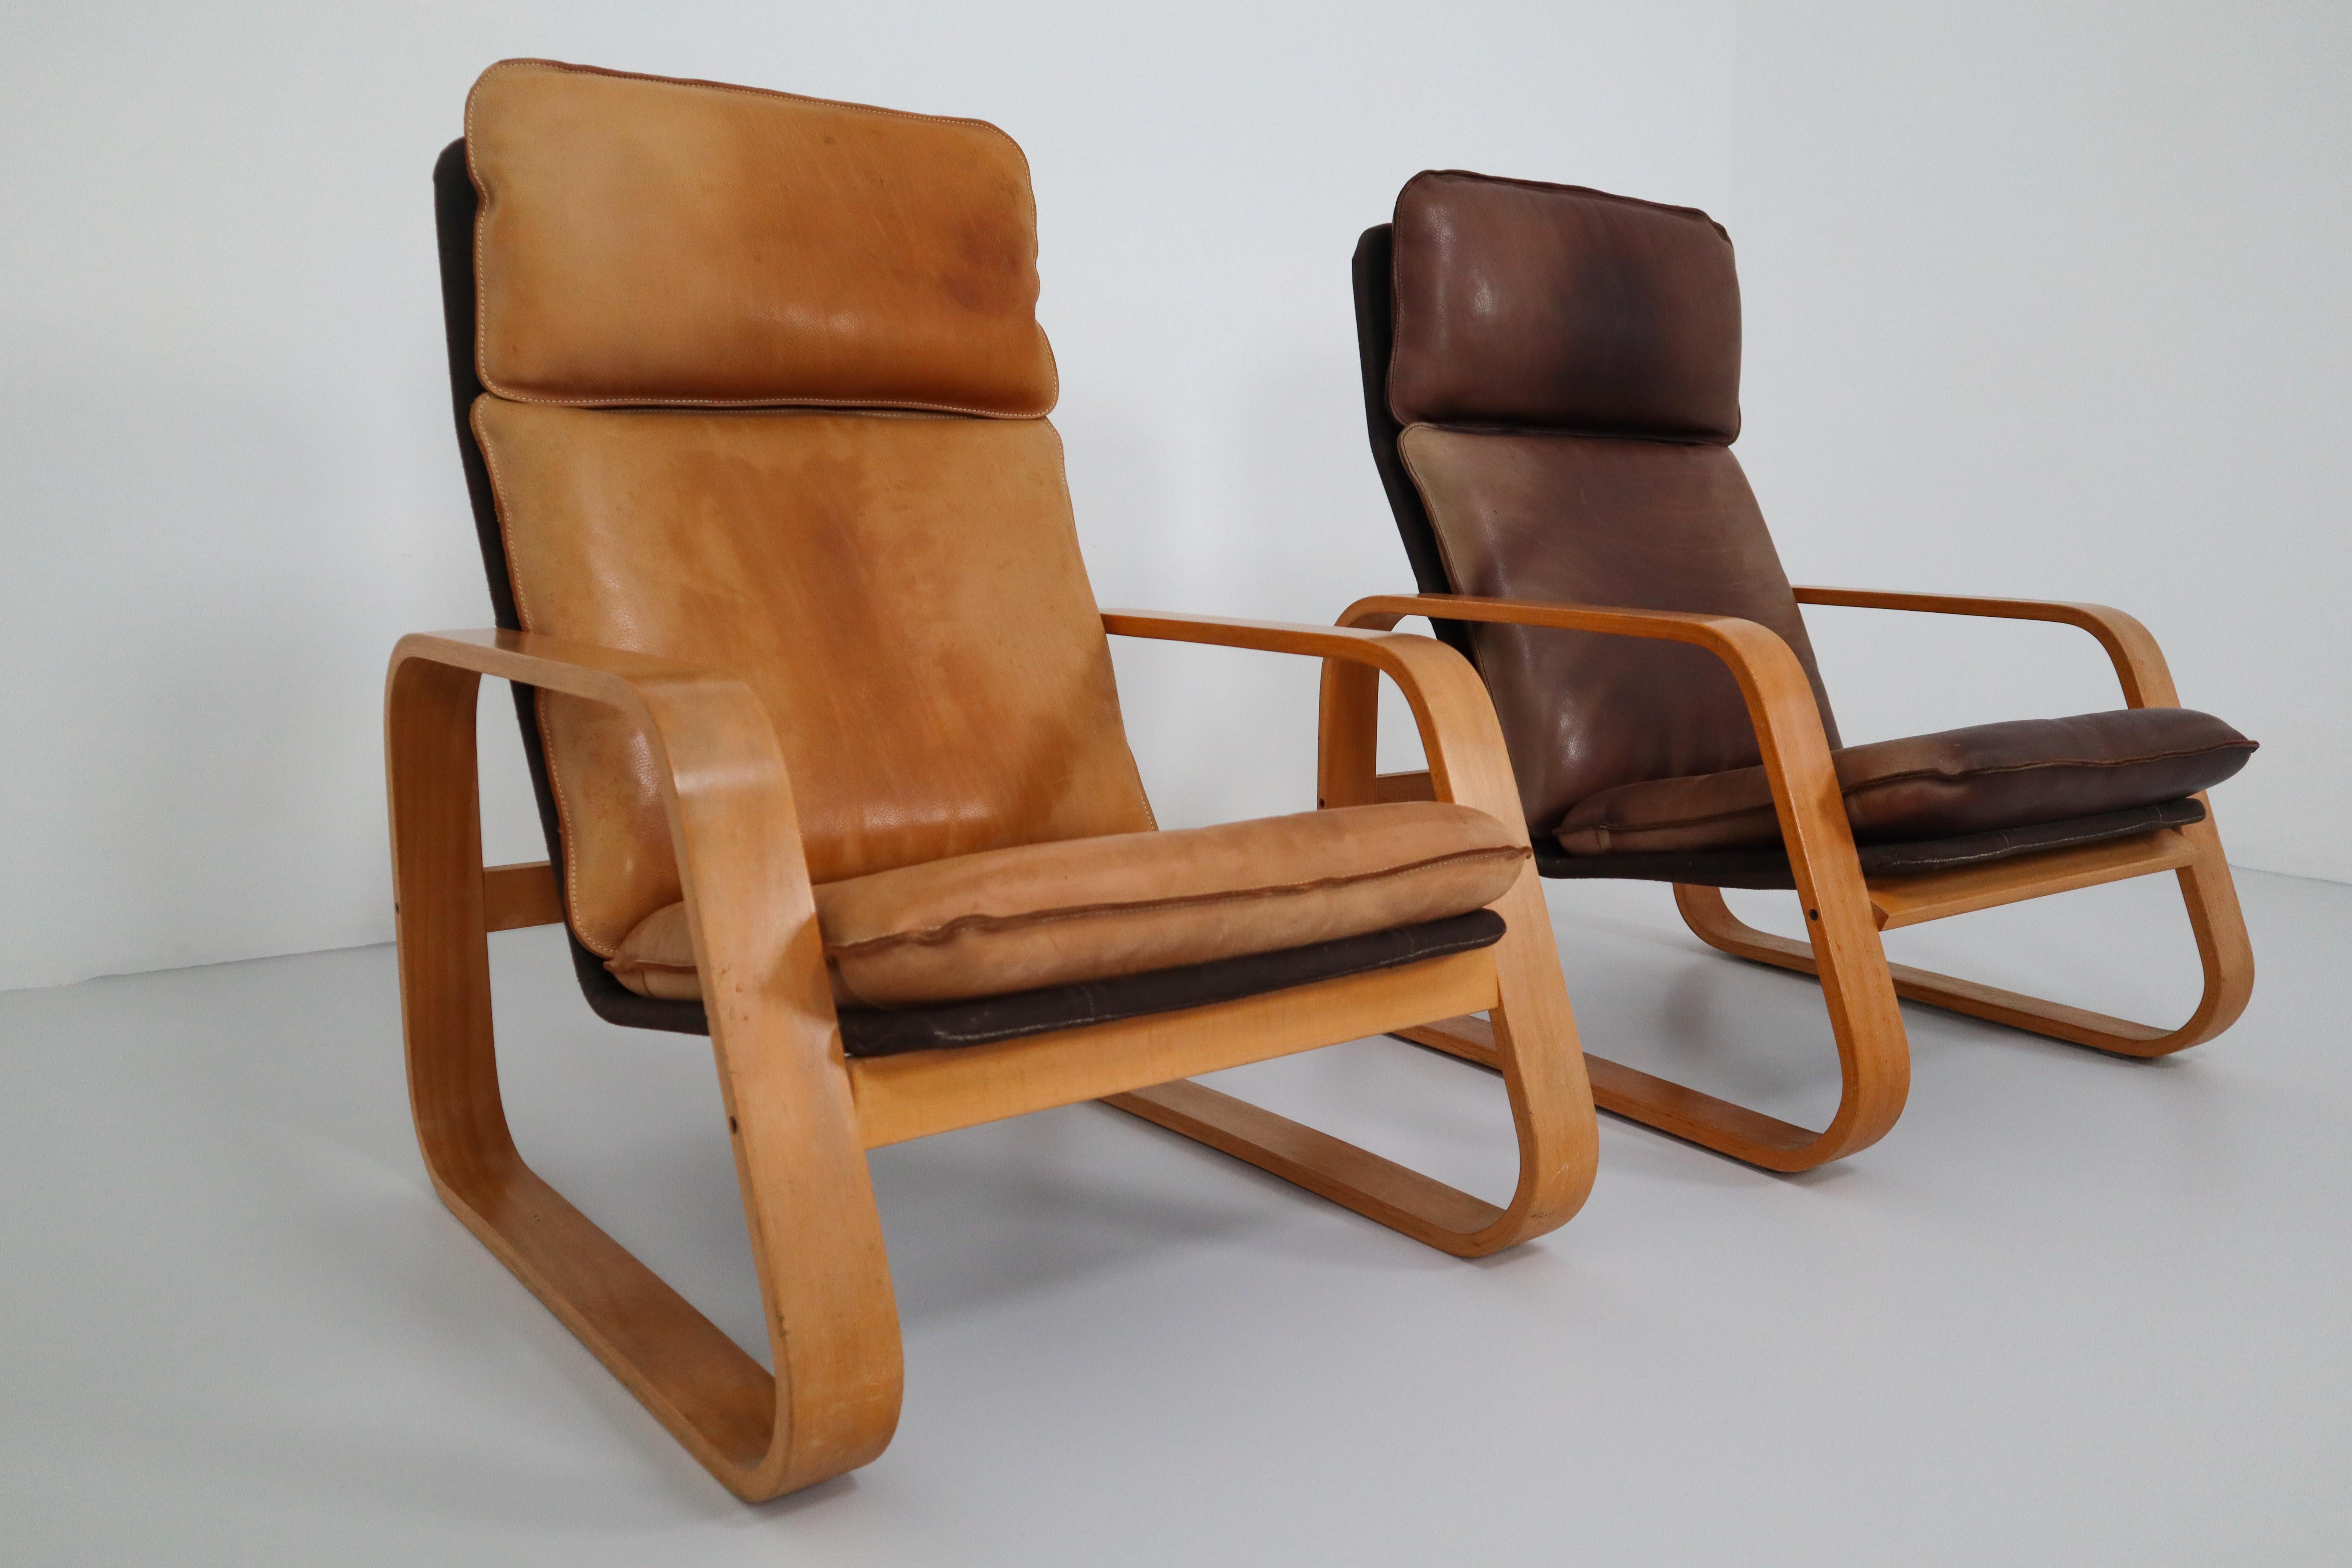 Set of three late midcentury lounge chairs, patinated leather, bentwood and fabric, France, 1970s.

These comfortable armchairs in bentwood and patinated saddle leather of this set, features a wonderful and rich patina and is therefore especially